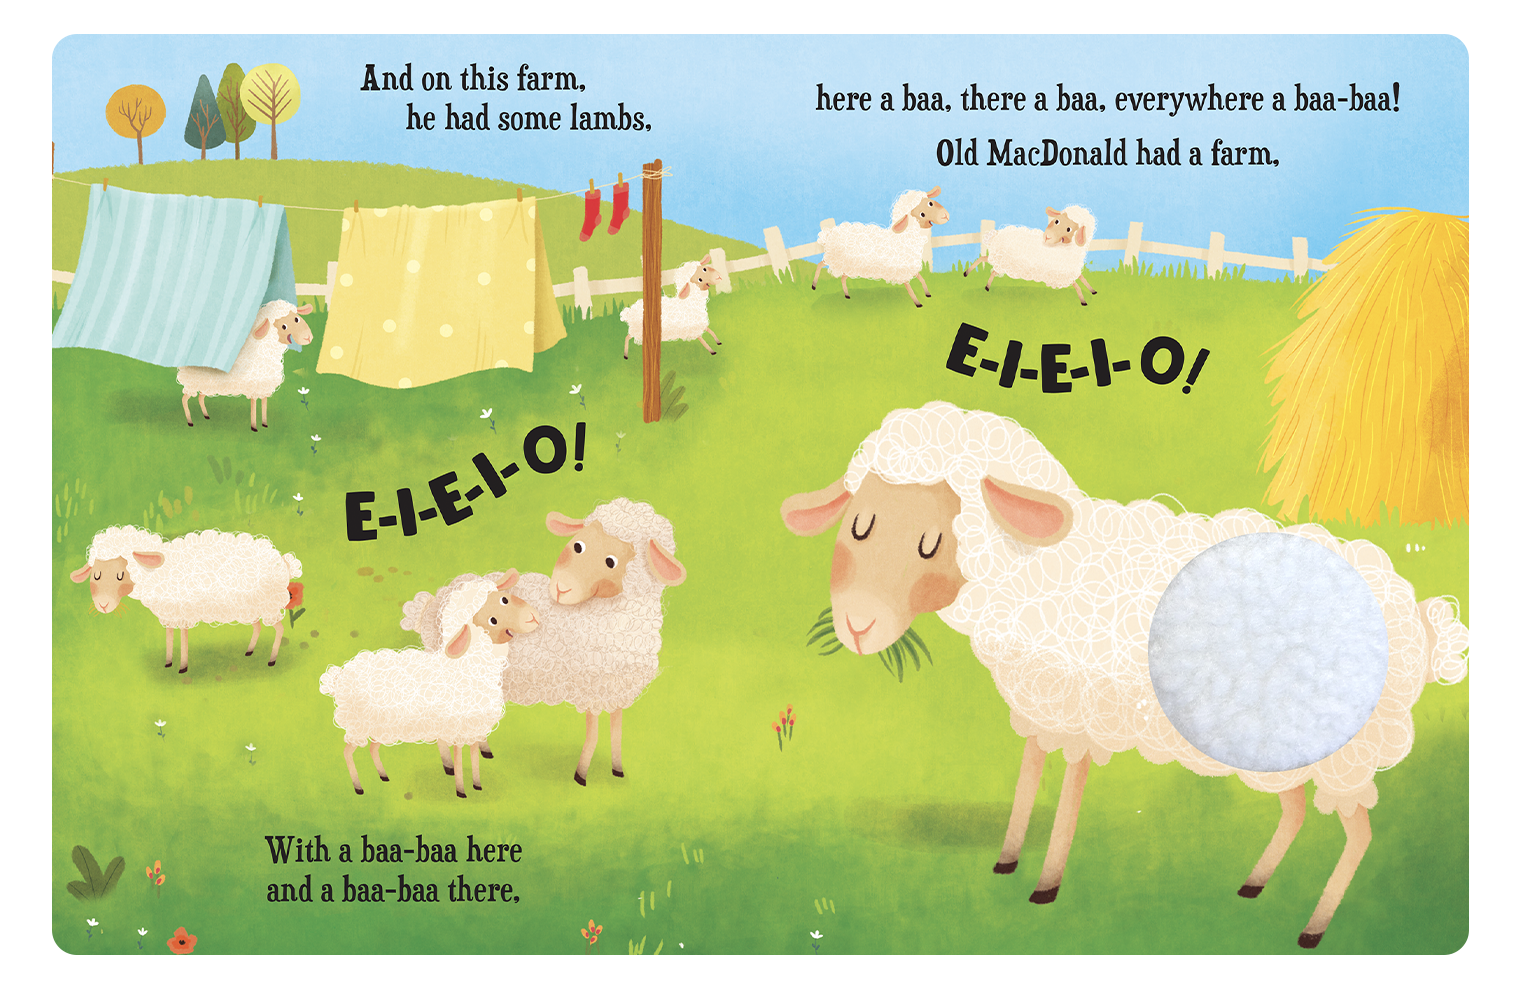 Little Hippo Books - Old MacDonald Had A Farm: A Touch and Feel Book